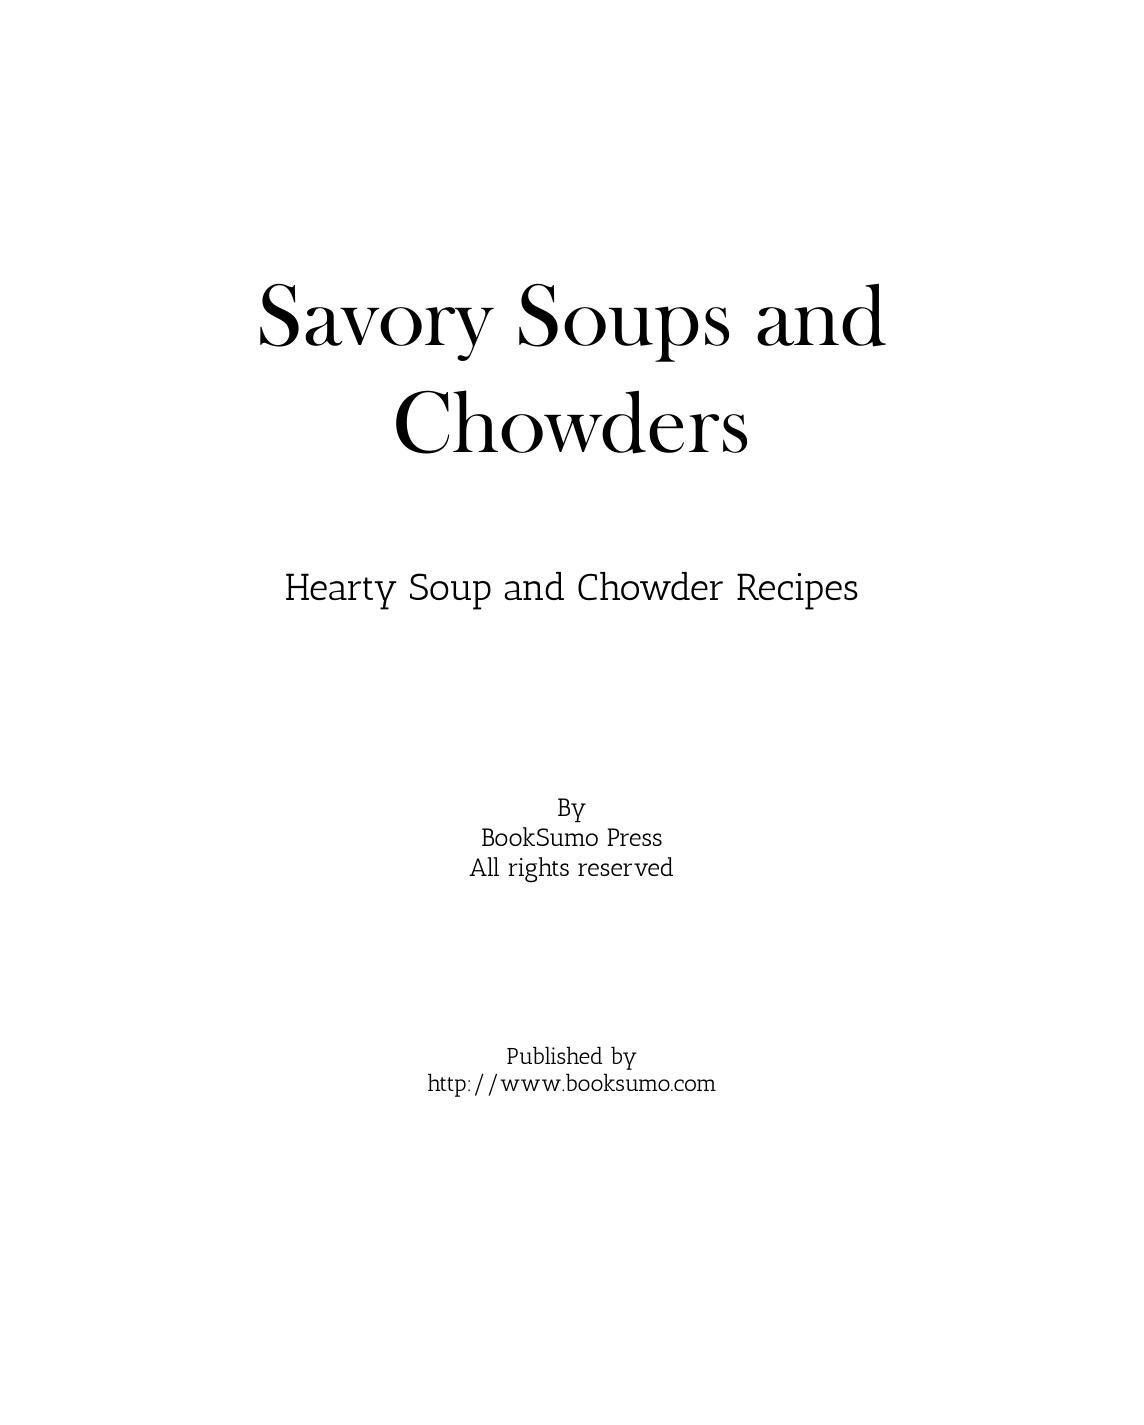 Savory Soups and Chowders: Hearty Soup and Chowder Recipes by BookSumo Press